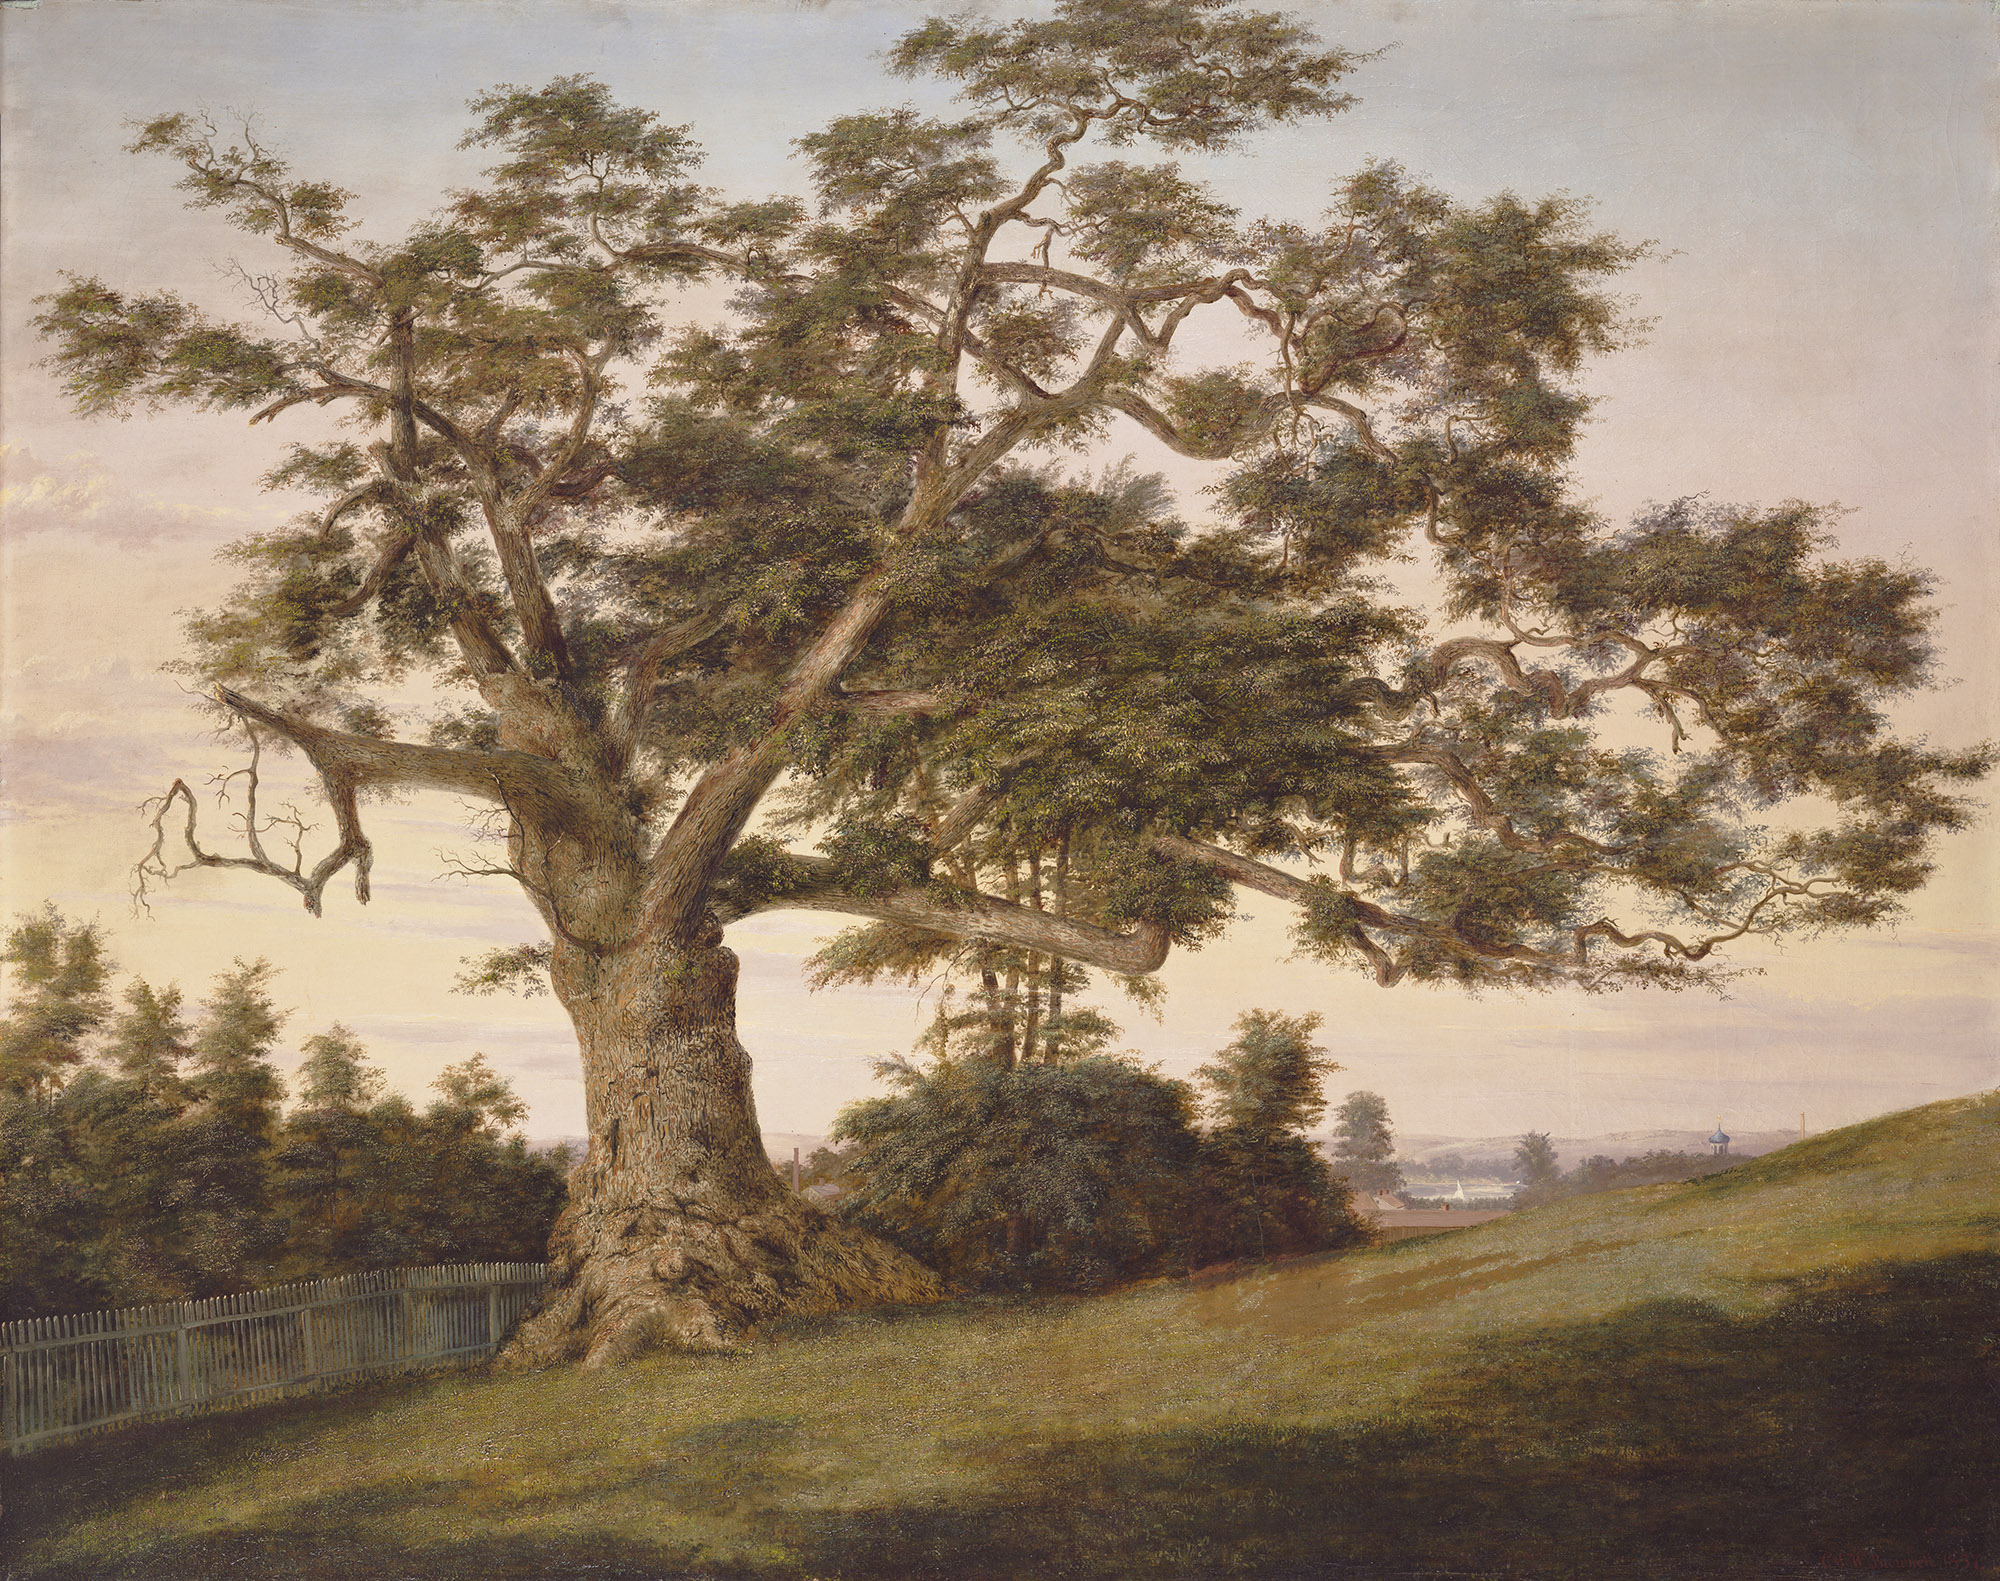 Charles de Wolf Brownell, The Charter Oak, 1857. Oil on canvas. Gift of Mrs. Josephine Marshall Dodge and Marshall Jewell Dodge, in memory of Marshall Jewell.